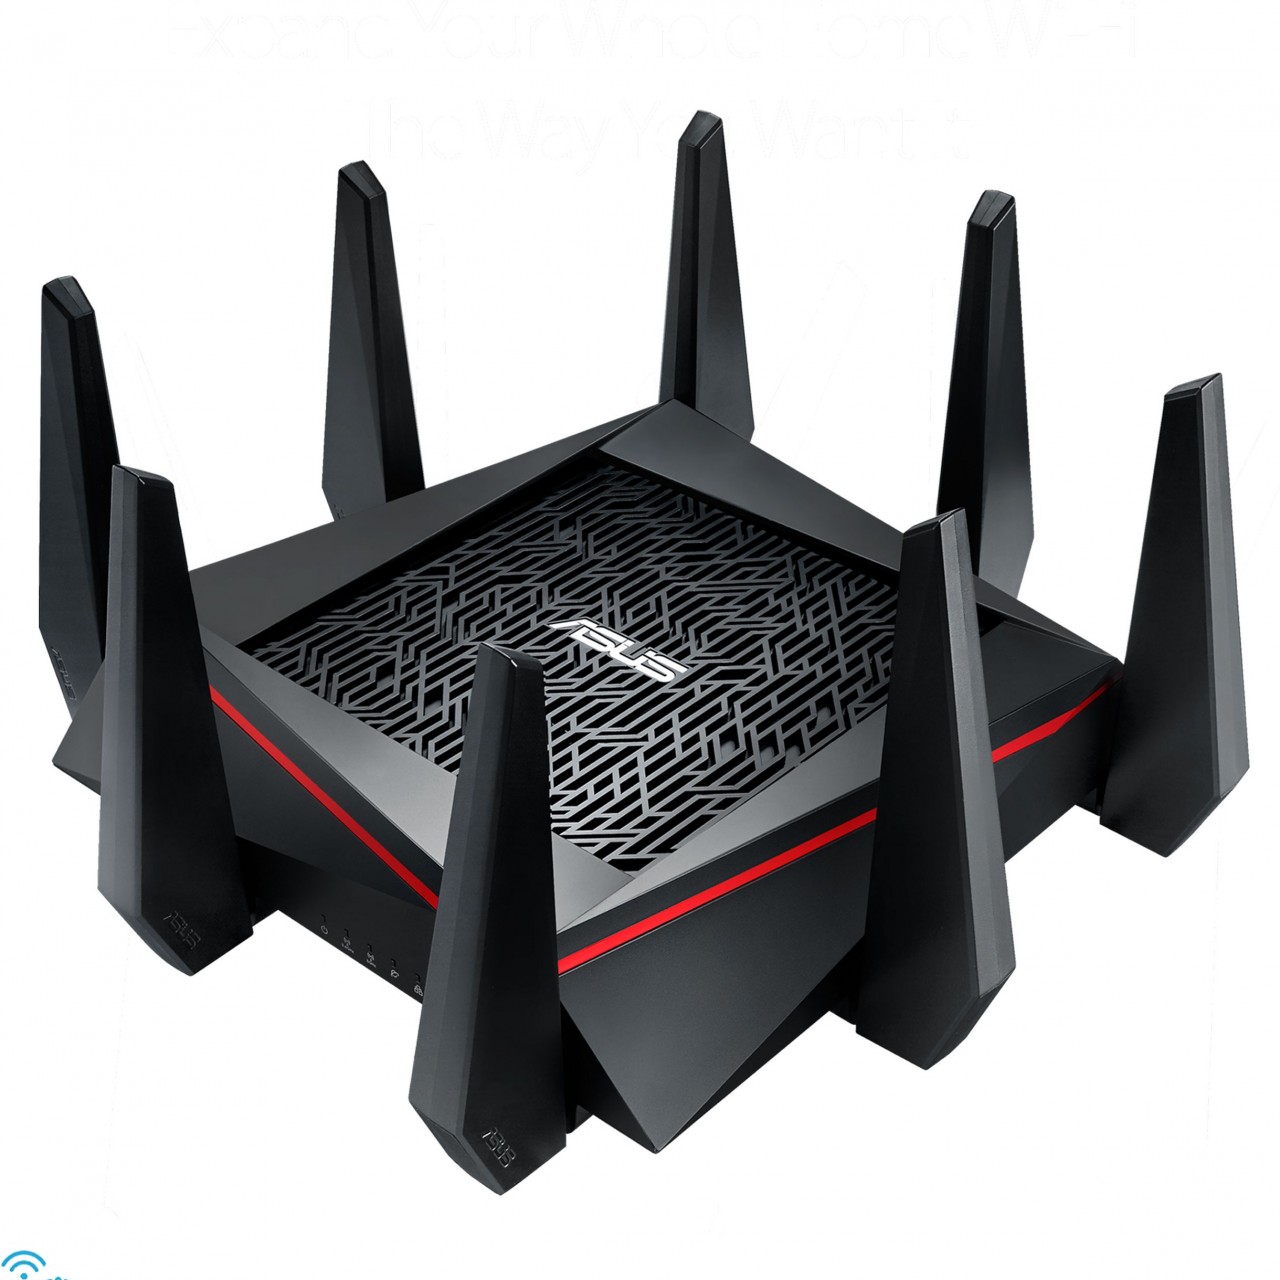 5. ASUS Tri-Band Wireless-AC5300 Gigabit Gaming Router RT-AC5300 – 4x4 Antenna - WTFast Game Acceler